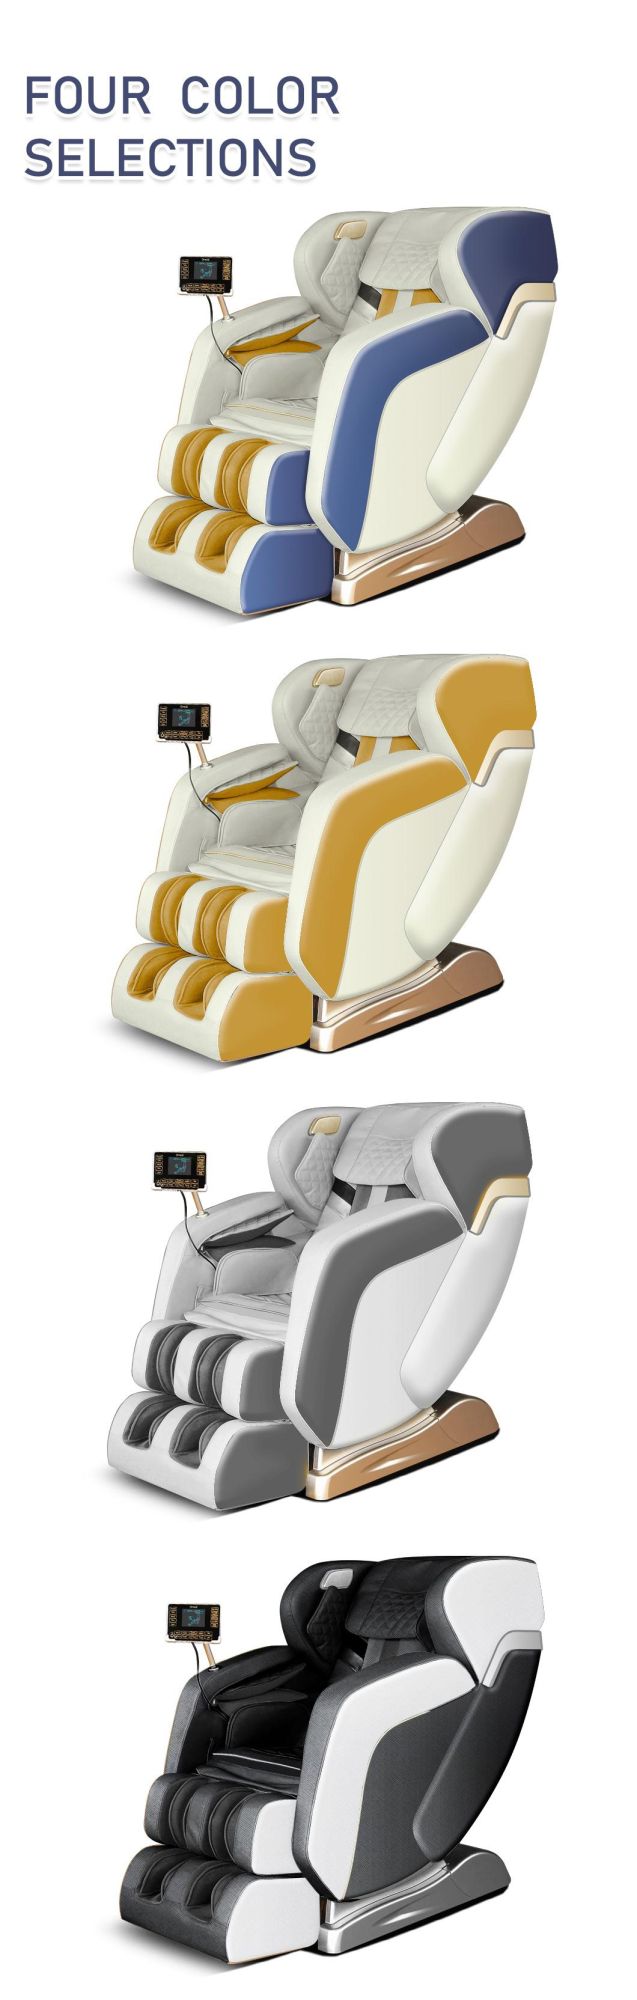 Electric Latest Luxury Full Body Thai Stretch Zero Gravity 4D Office Sofa Massage Chair with Low Price